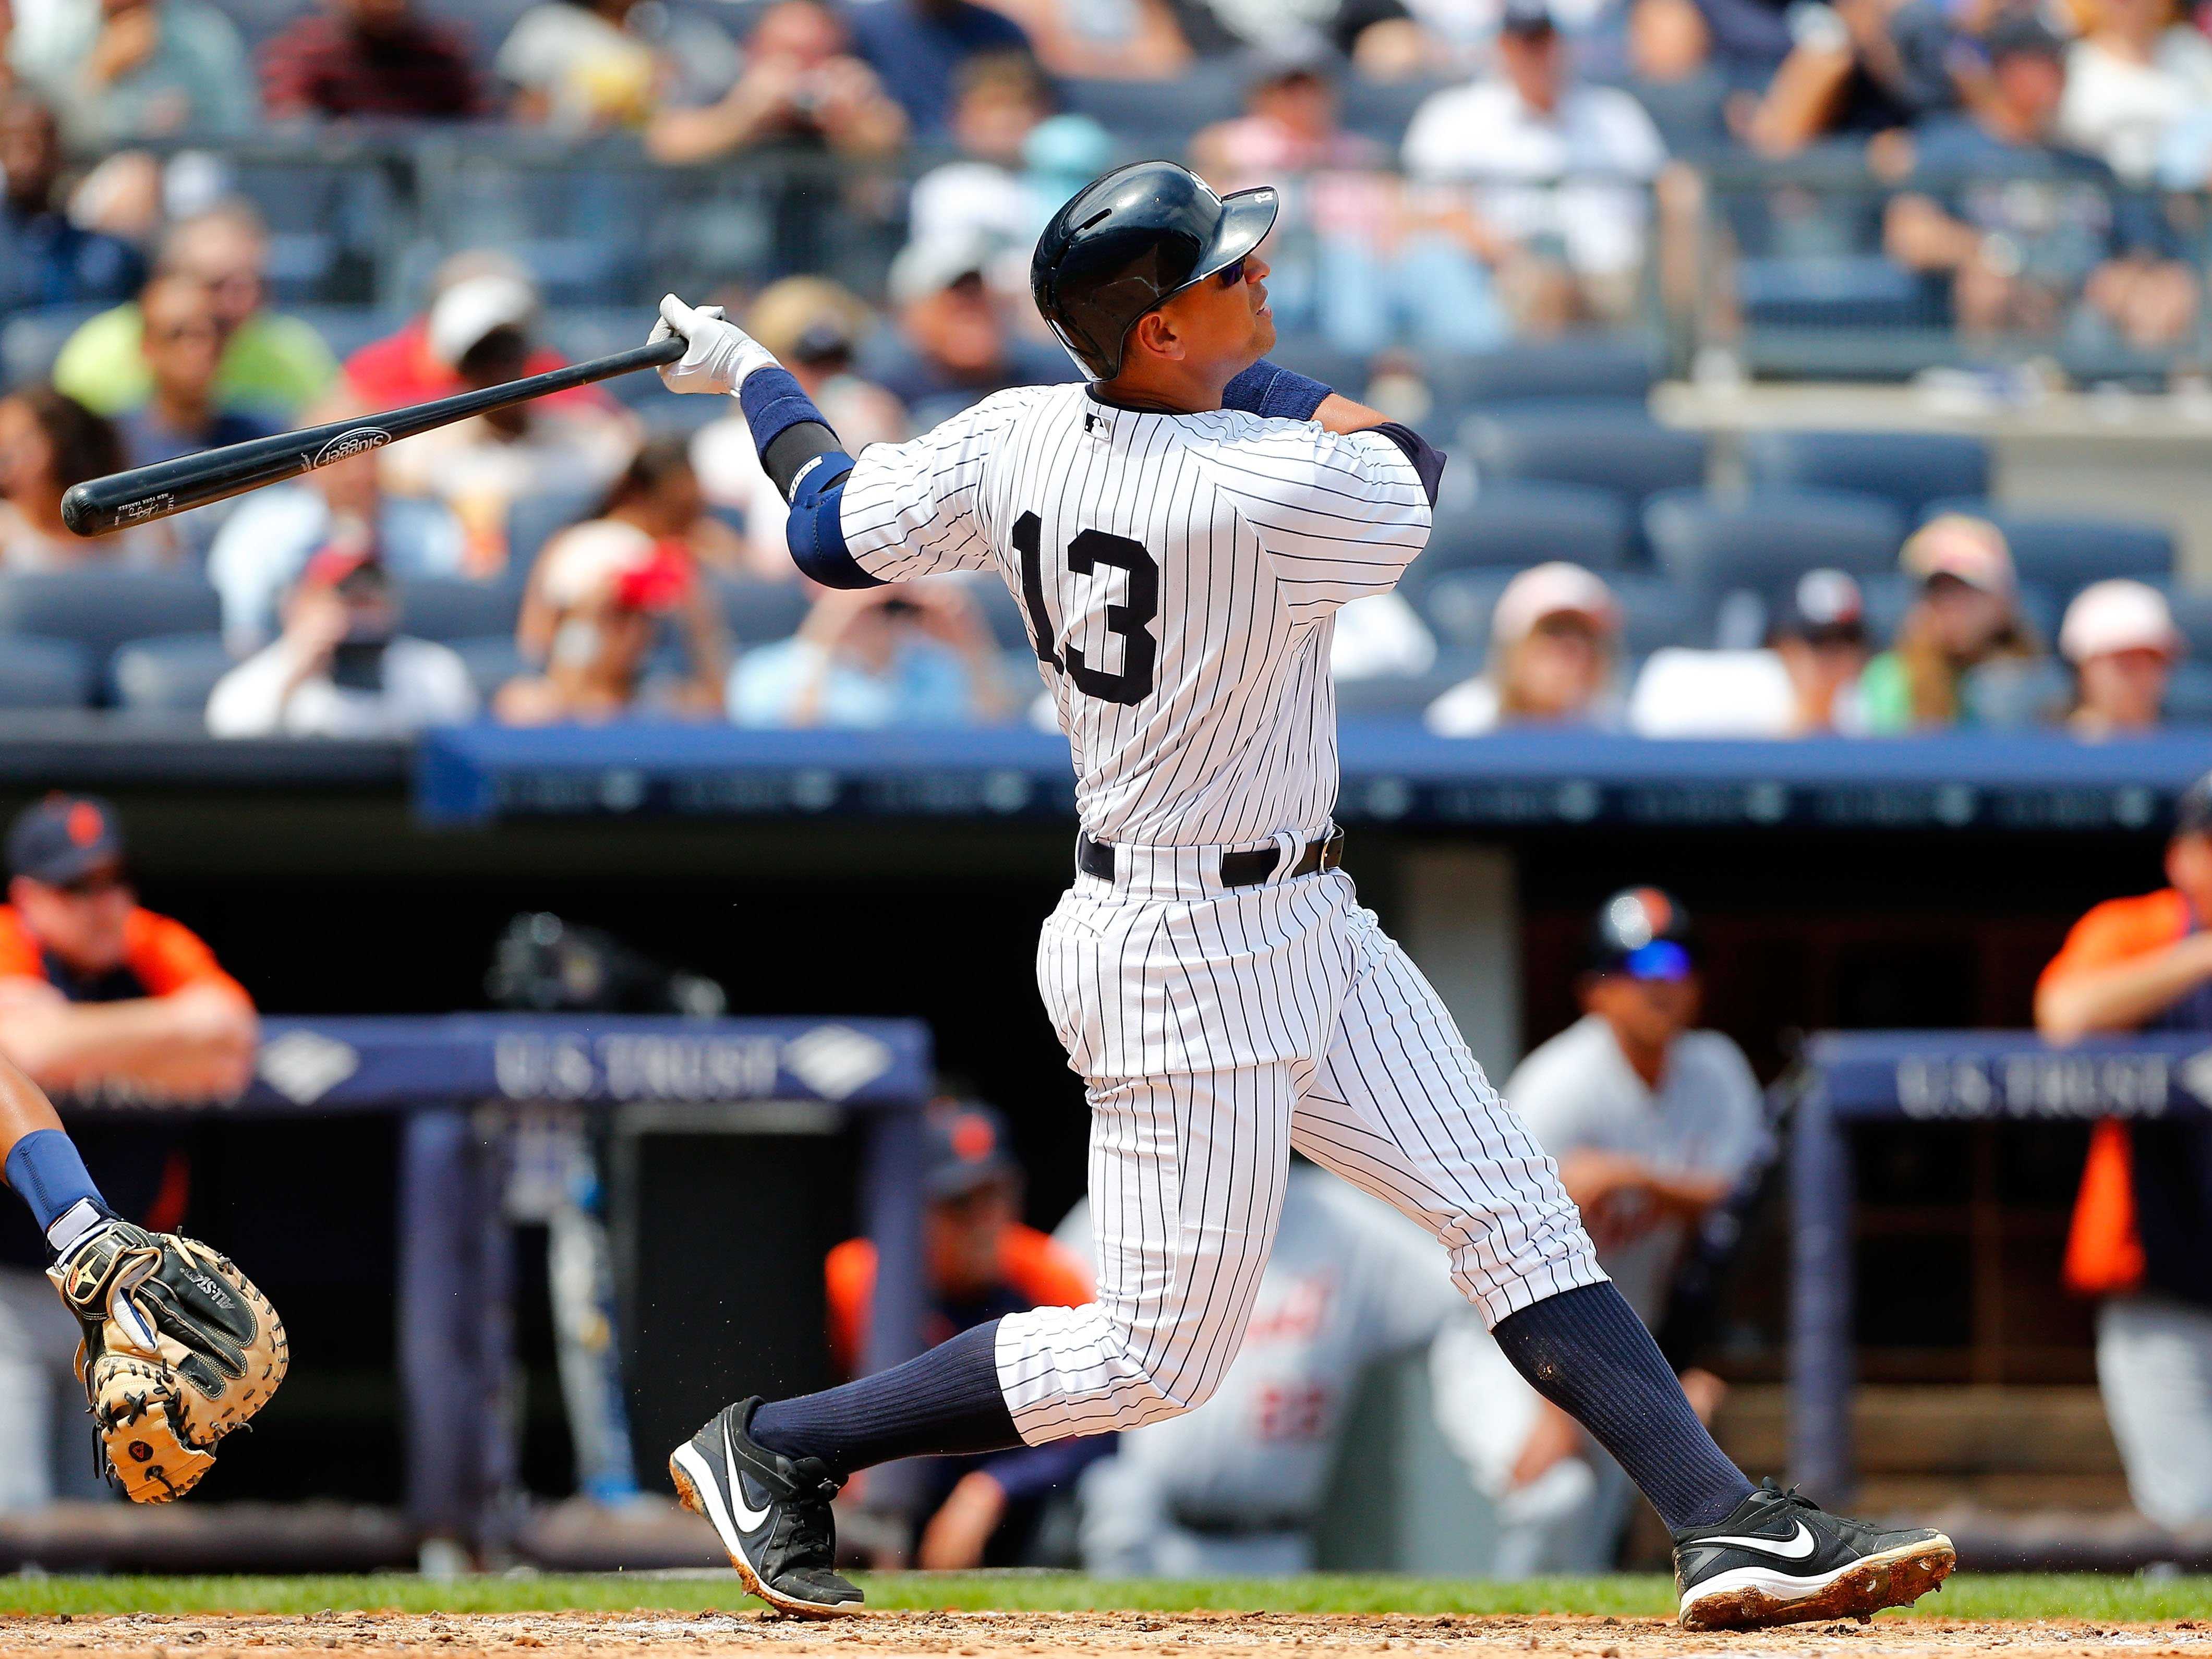 a-rod-hit-his-first-home-run-of-the-year-and-now-yankees-fans-love-him.jpg